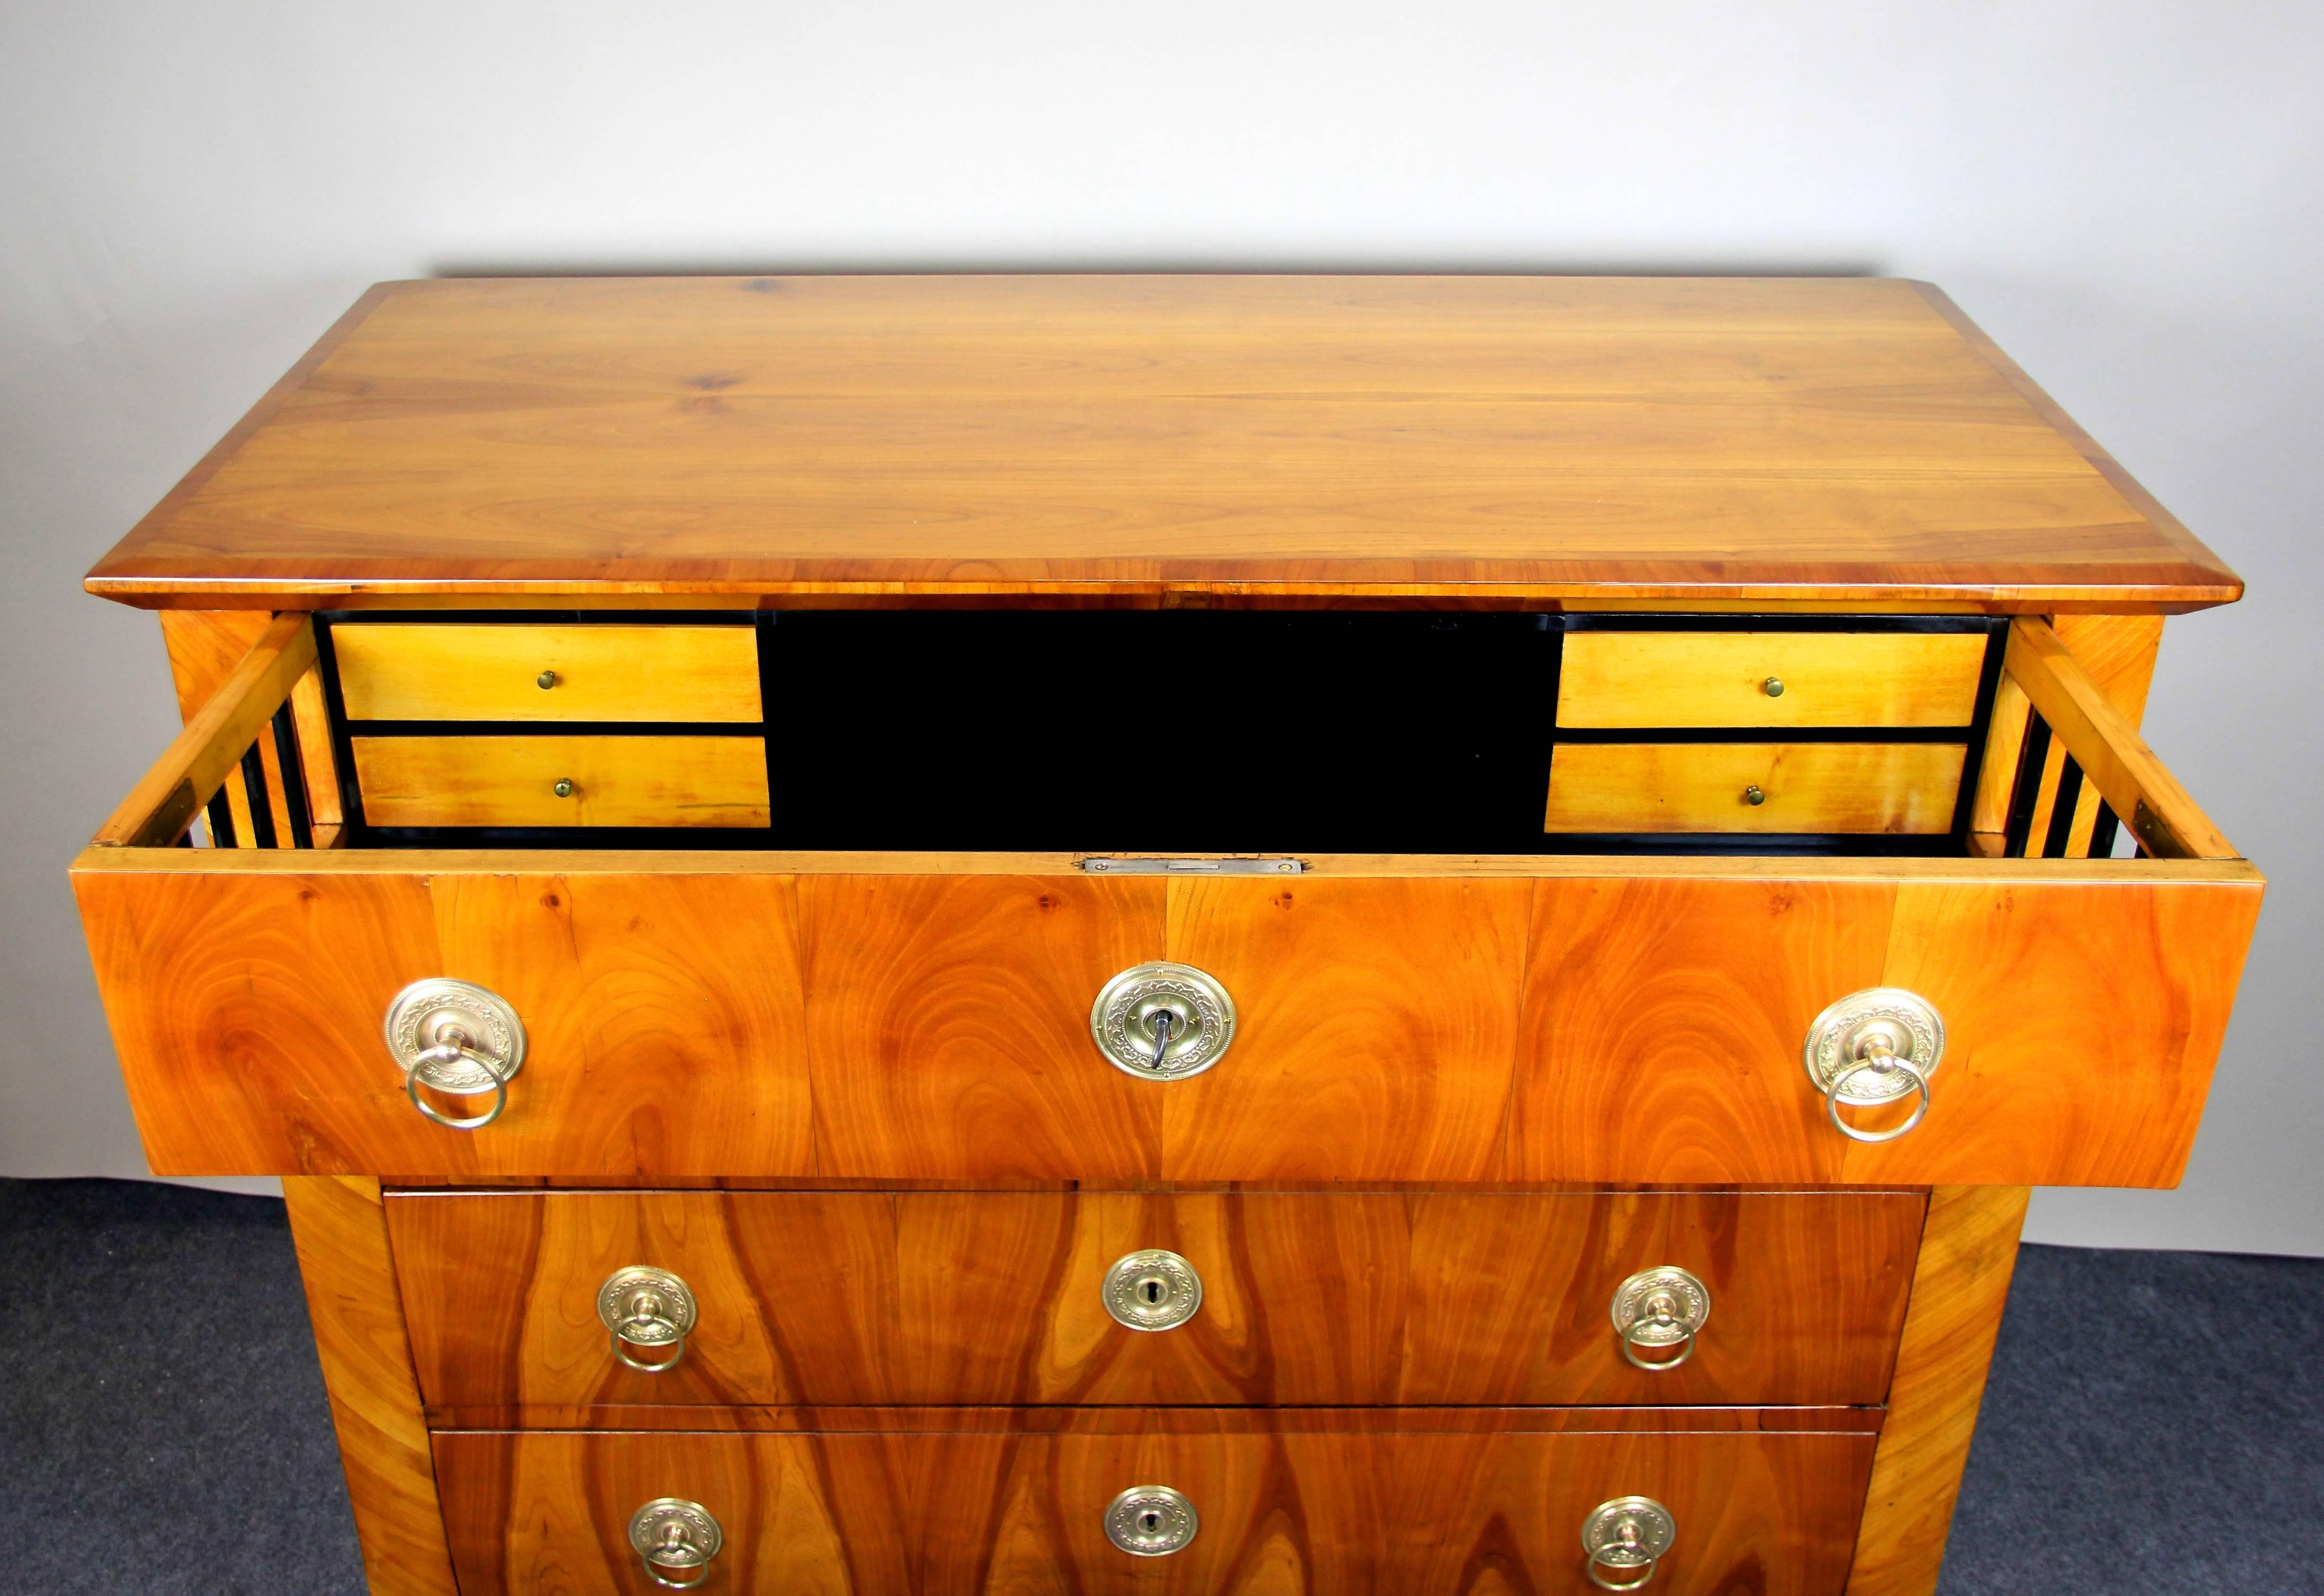 Fantastic cherrywood chest of drawers or writing commode from the Biedermeier period circa 1830 in Austria. Veneered in finest cherrywood by showing an outstanding grain, this perfect restored chest comes with four large drawers. The top drawer